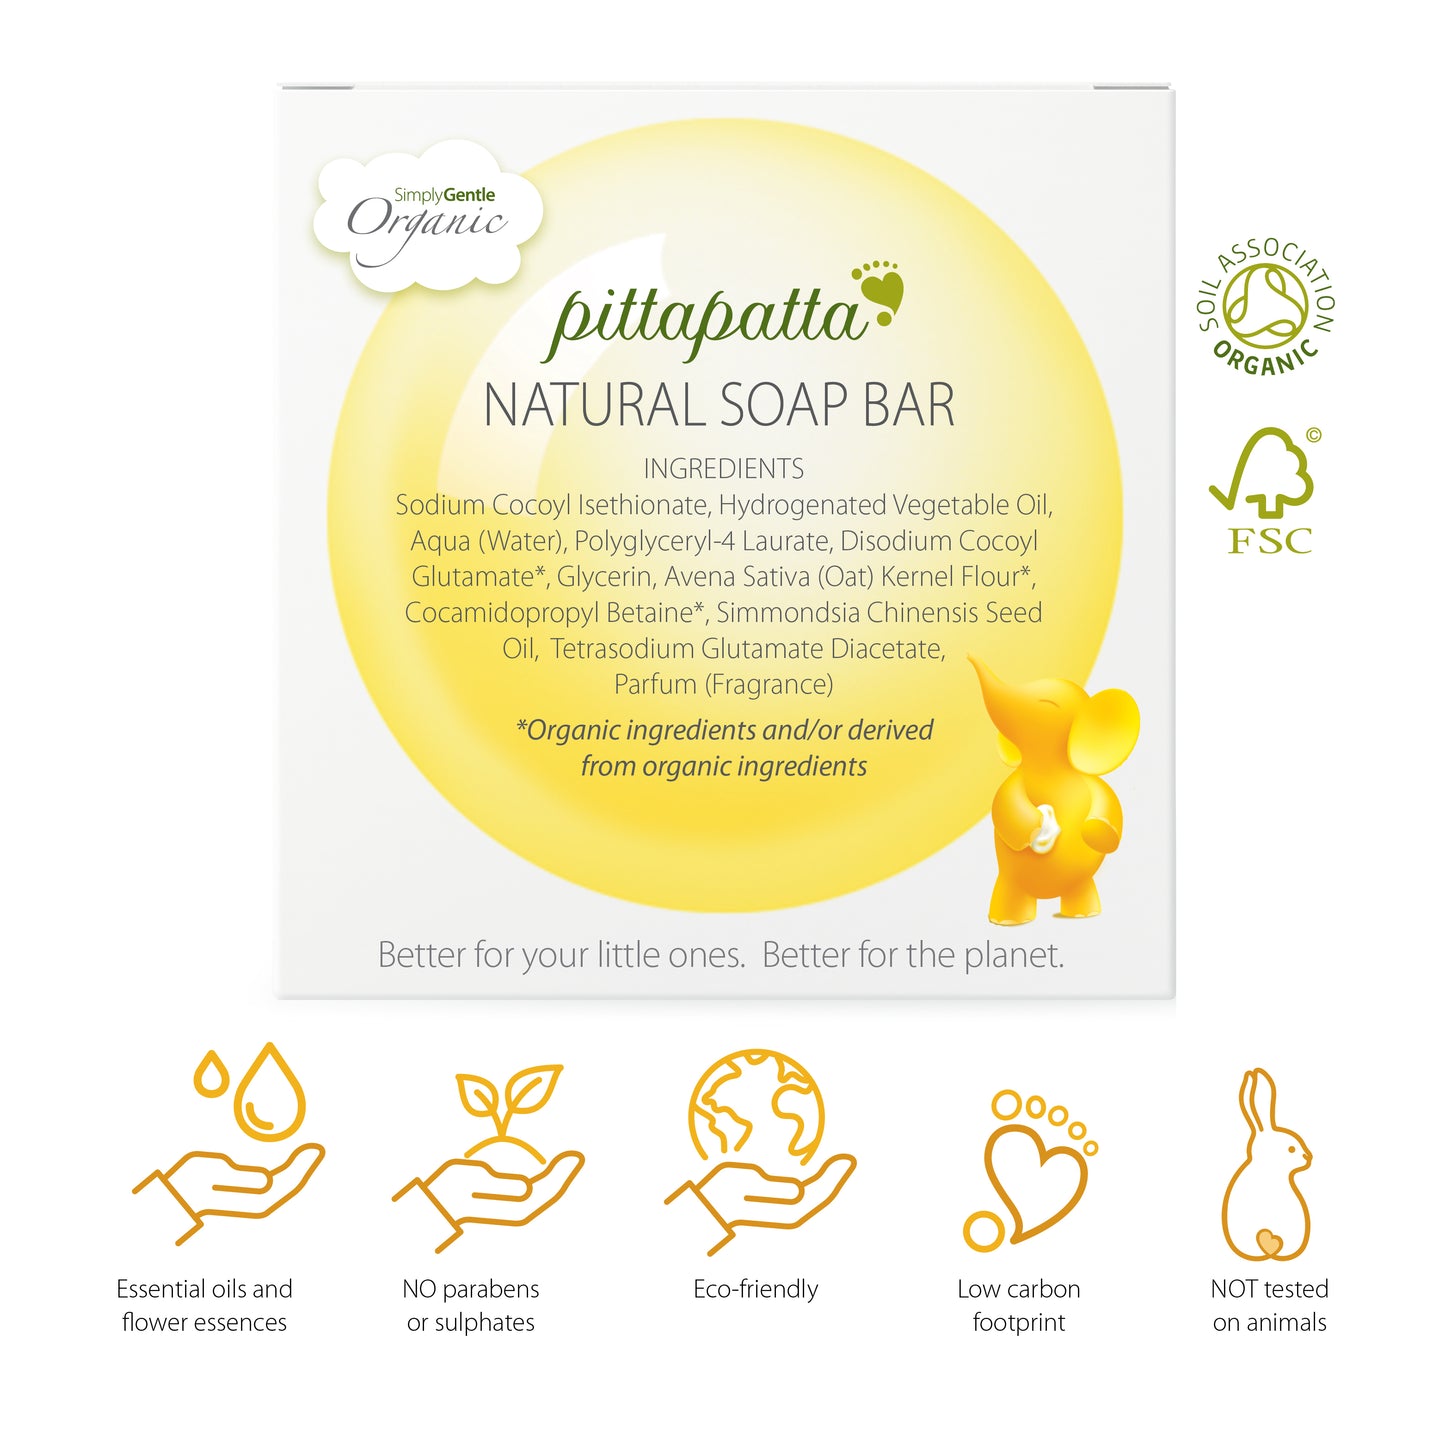 Pittapatta skincare range is made from natural and organic ingredients and infused with organic essential oils and flower essences designed to be gentle and a joy to use.